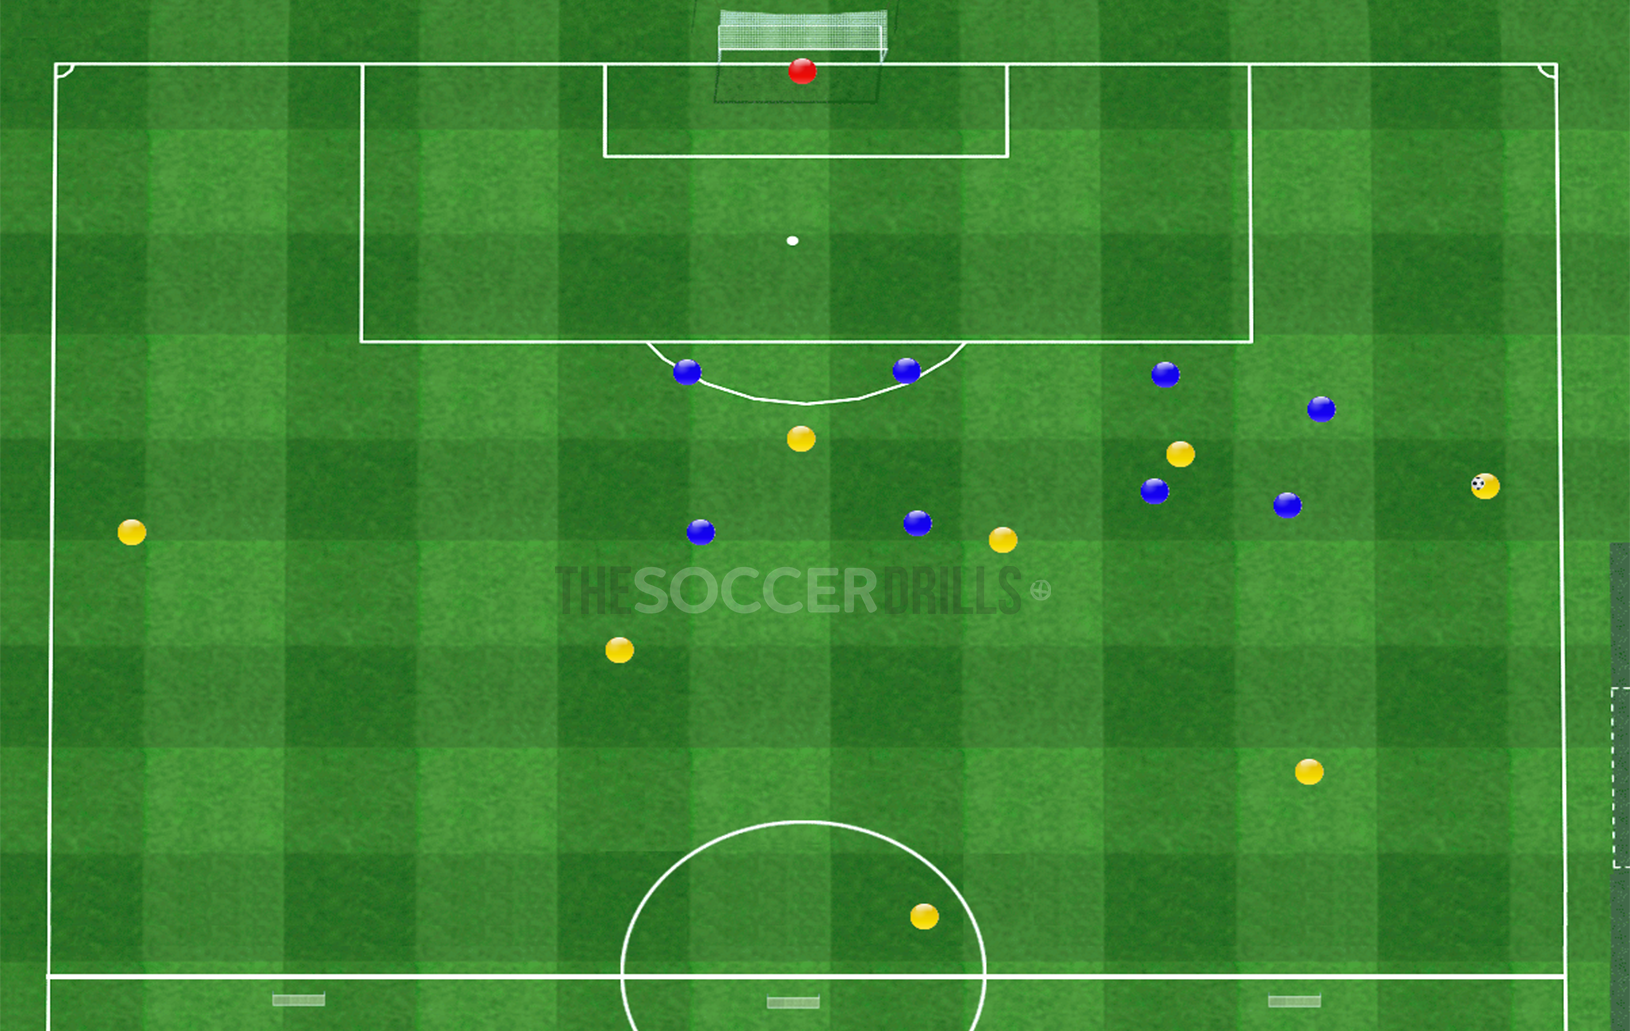 Soccer Drills for coaches, Soccer Drills for kds, Tactical Football Exercises, Tacical Soccer Drills, Drills for counterattack, Possesion possesion drills soccer, Small-Sided Soccer Games,